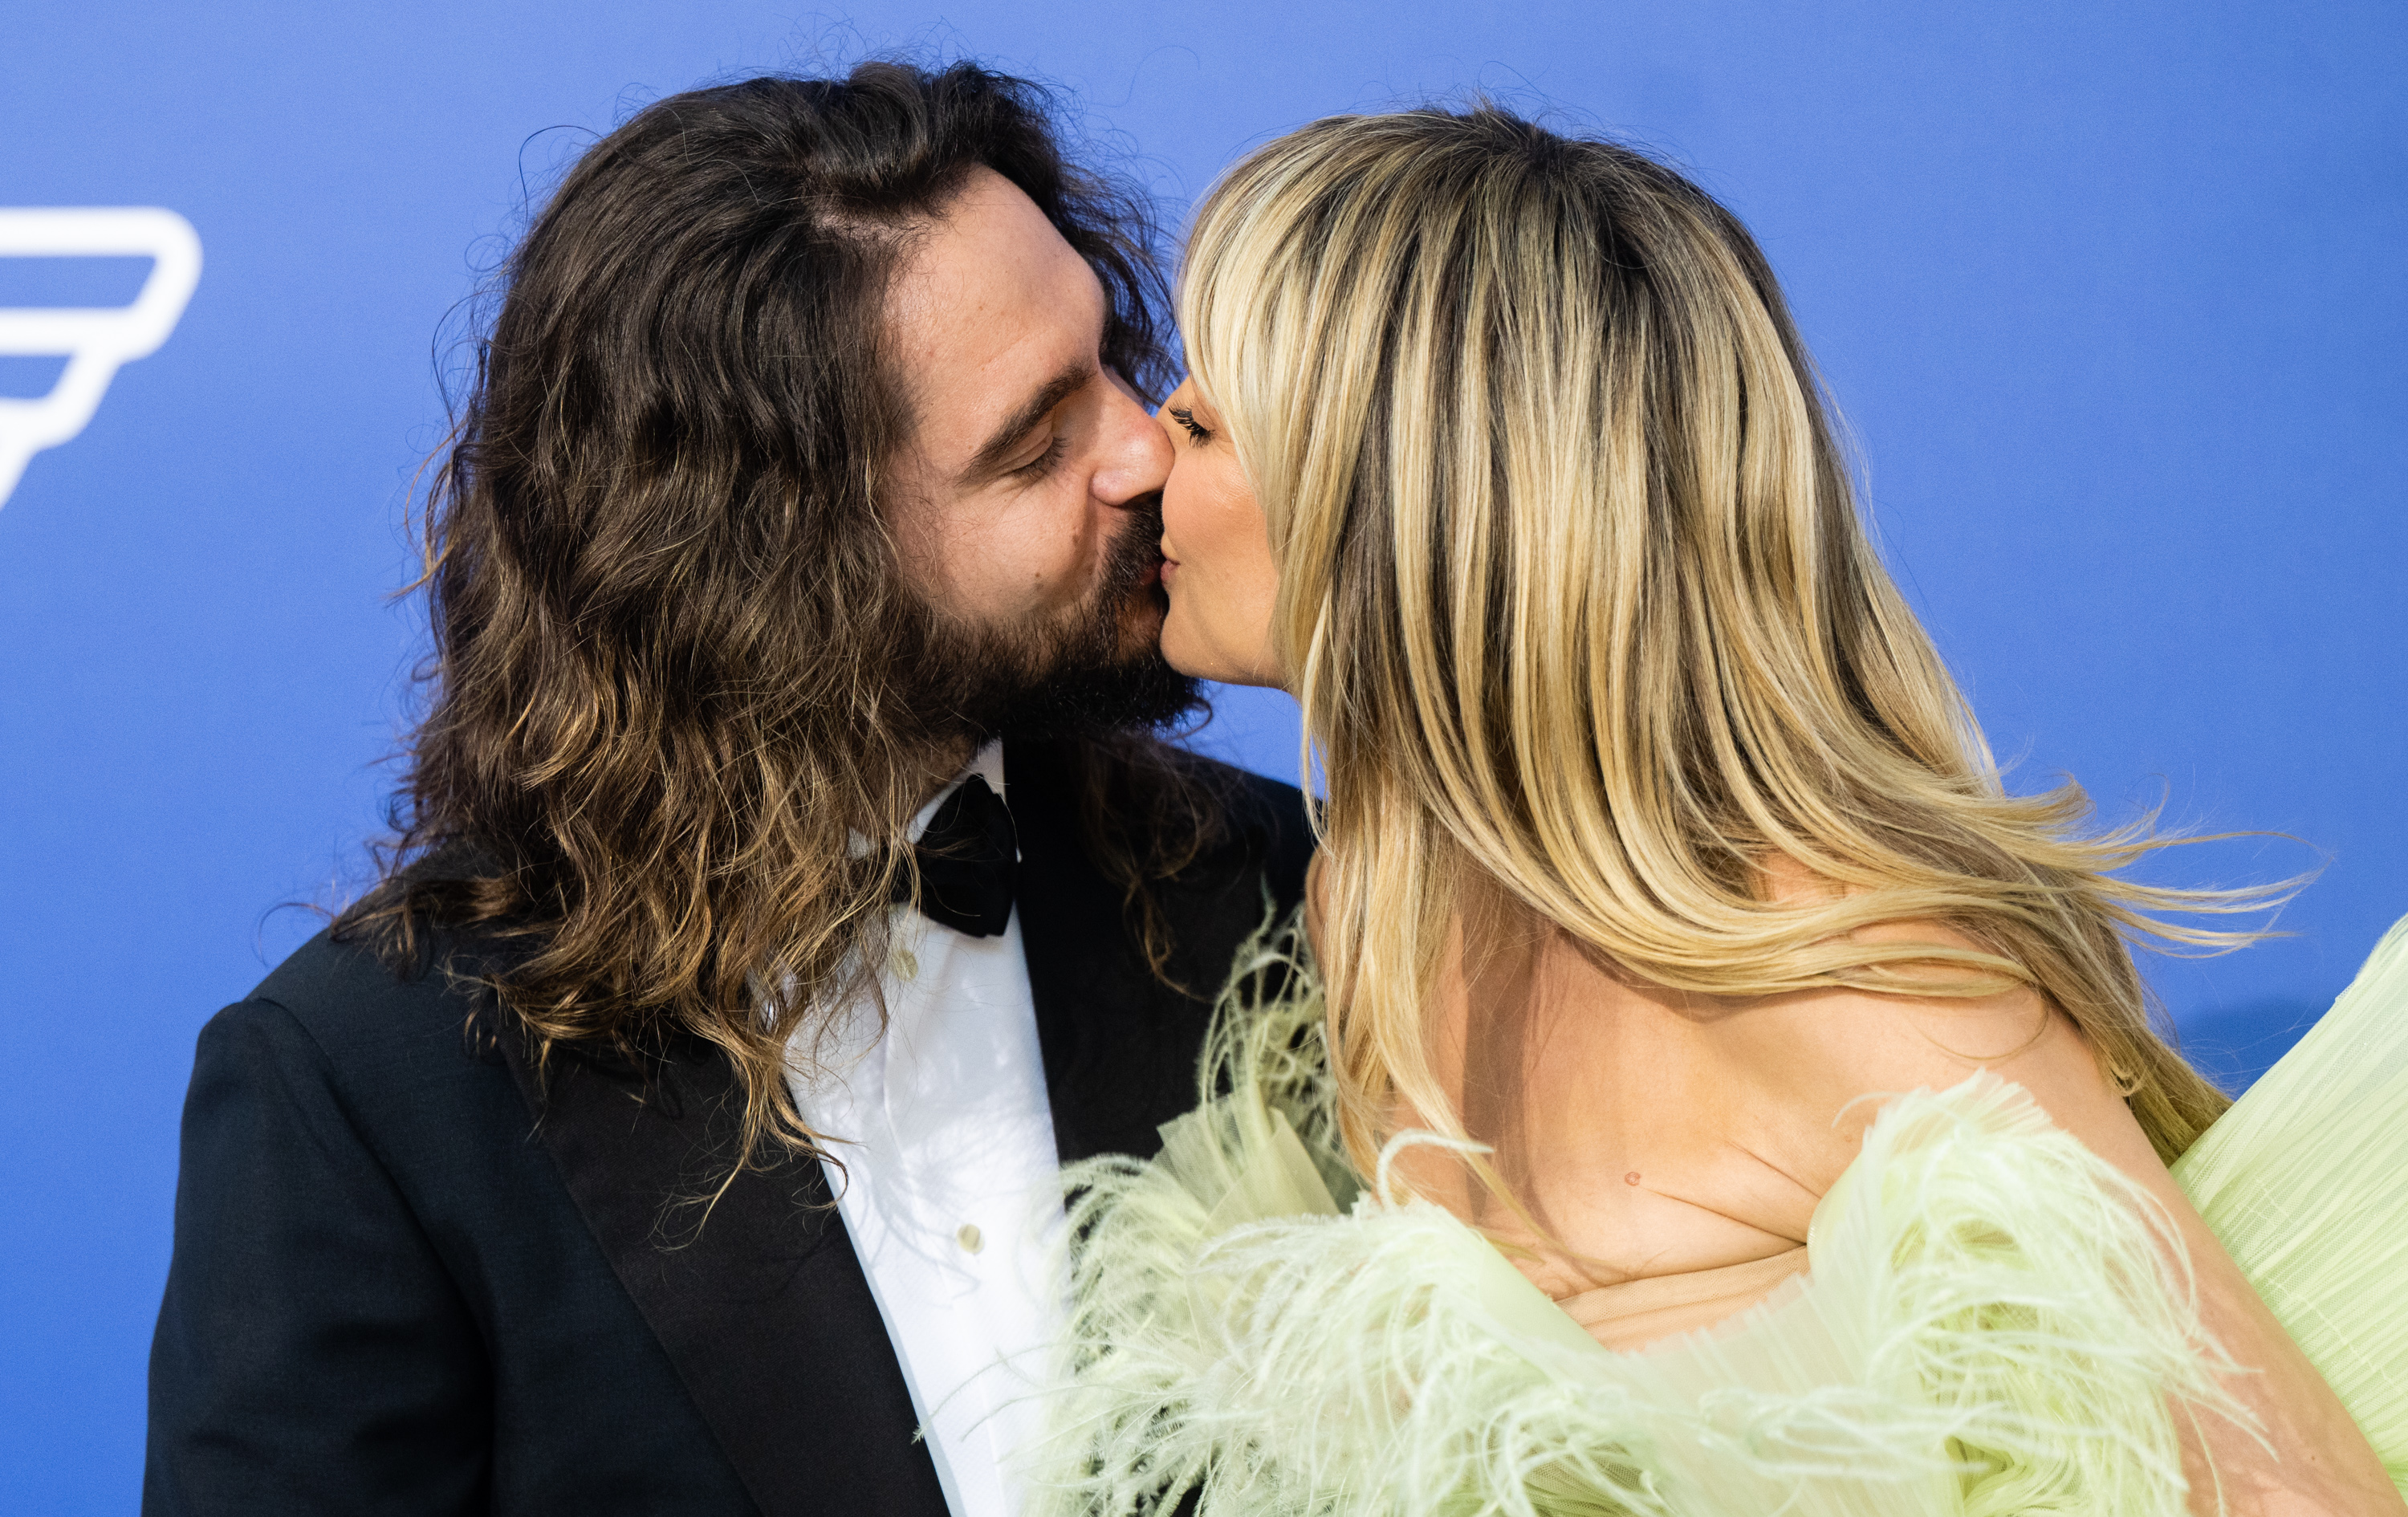 Tom Kaulitz and Heidi Klum sharing a kiss at the amfAR Cannes Gala in Cap d'Antibes, France on May 25, 2023 | Source: Getty Images